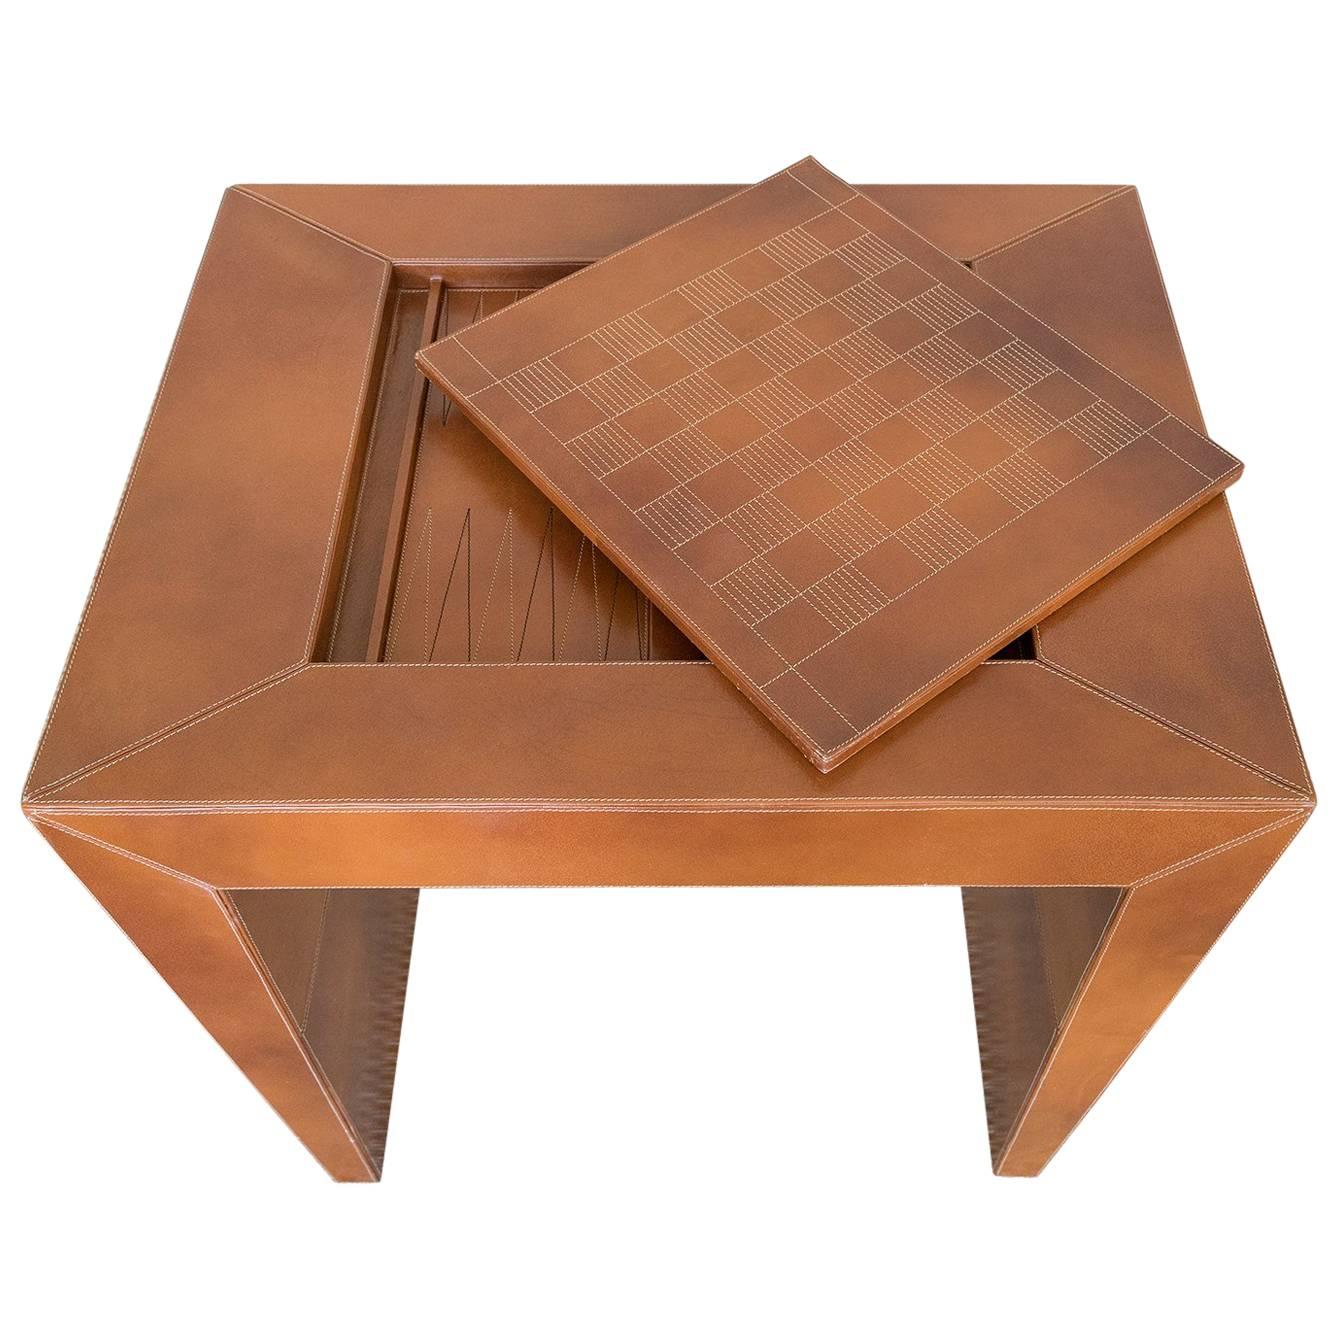 Chess/Backgammon/Checkers Game Table, 1970s Stitched Leather For Sale